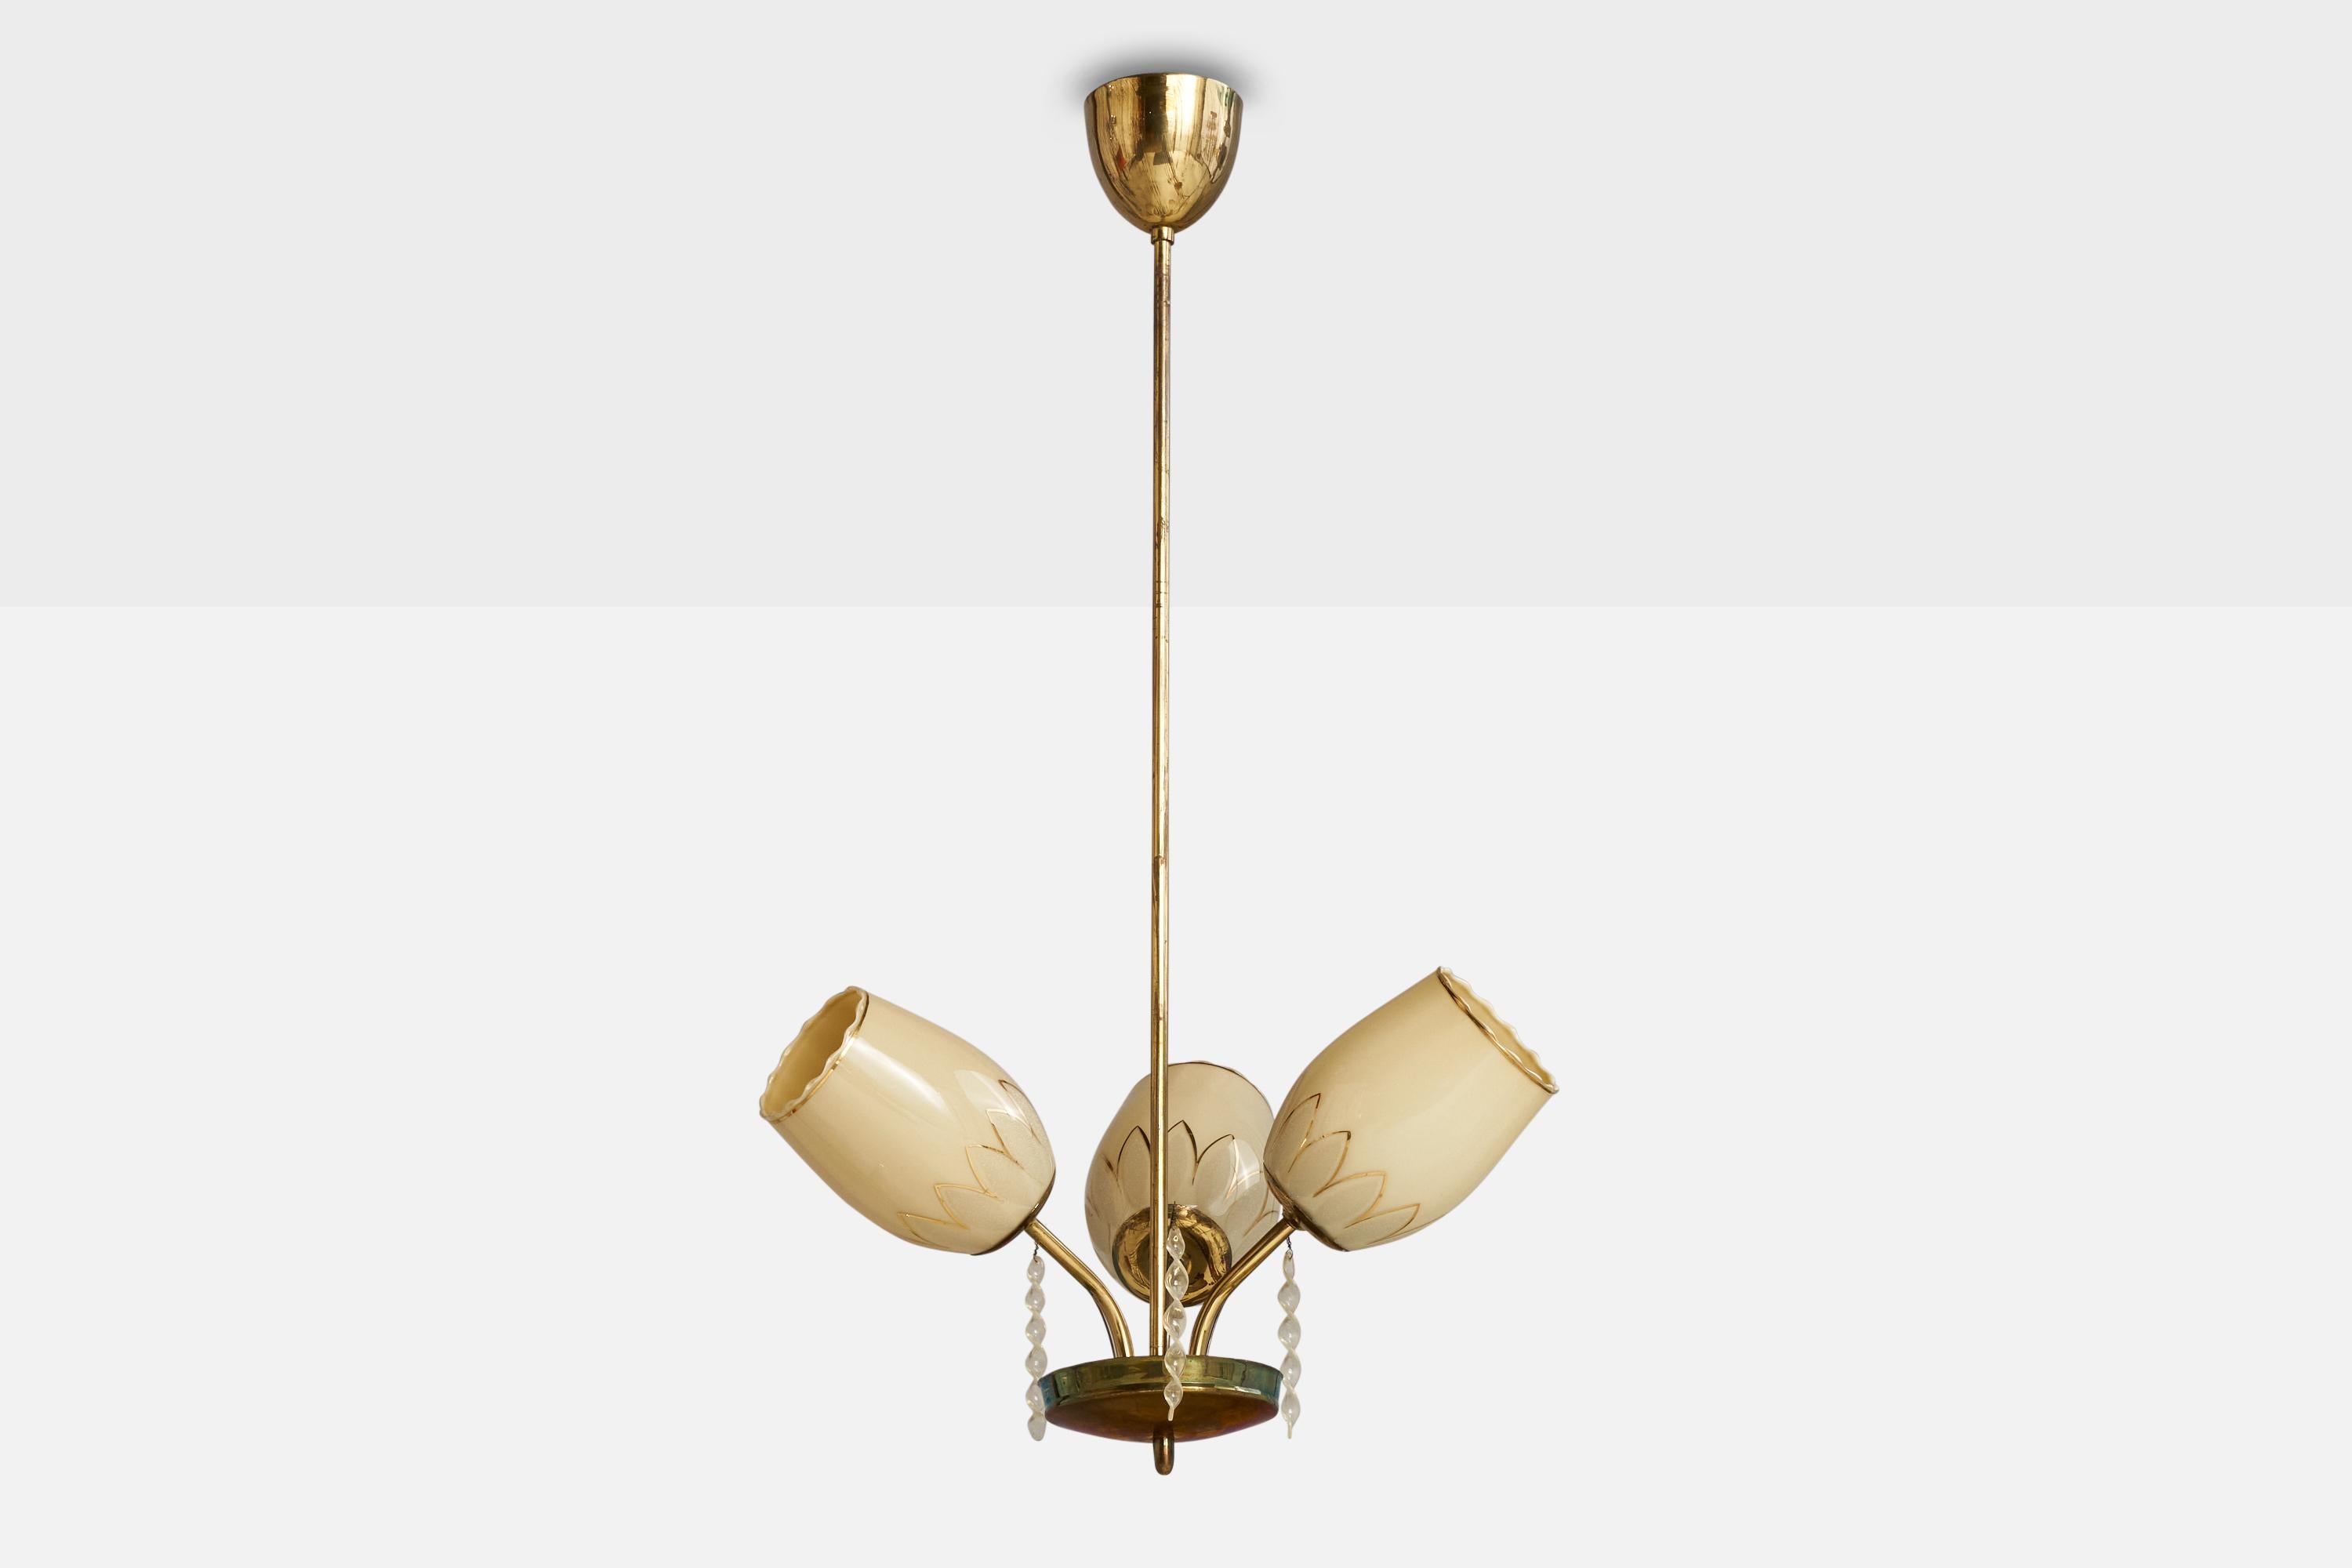 A brass, acrylic and gilded beige opaline glass designed and produced in Finland, 1940s.

Dimensions of canopy (inches): 3.25” H x 3.5”  Diameter
Socket takes standard E-26 bulbs. 3 sockets.There is no maximum wattage stated on the fixture. All